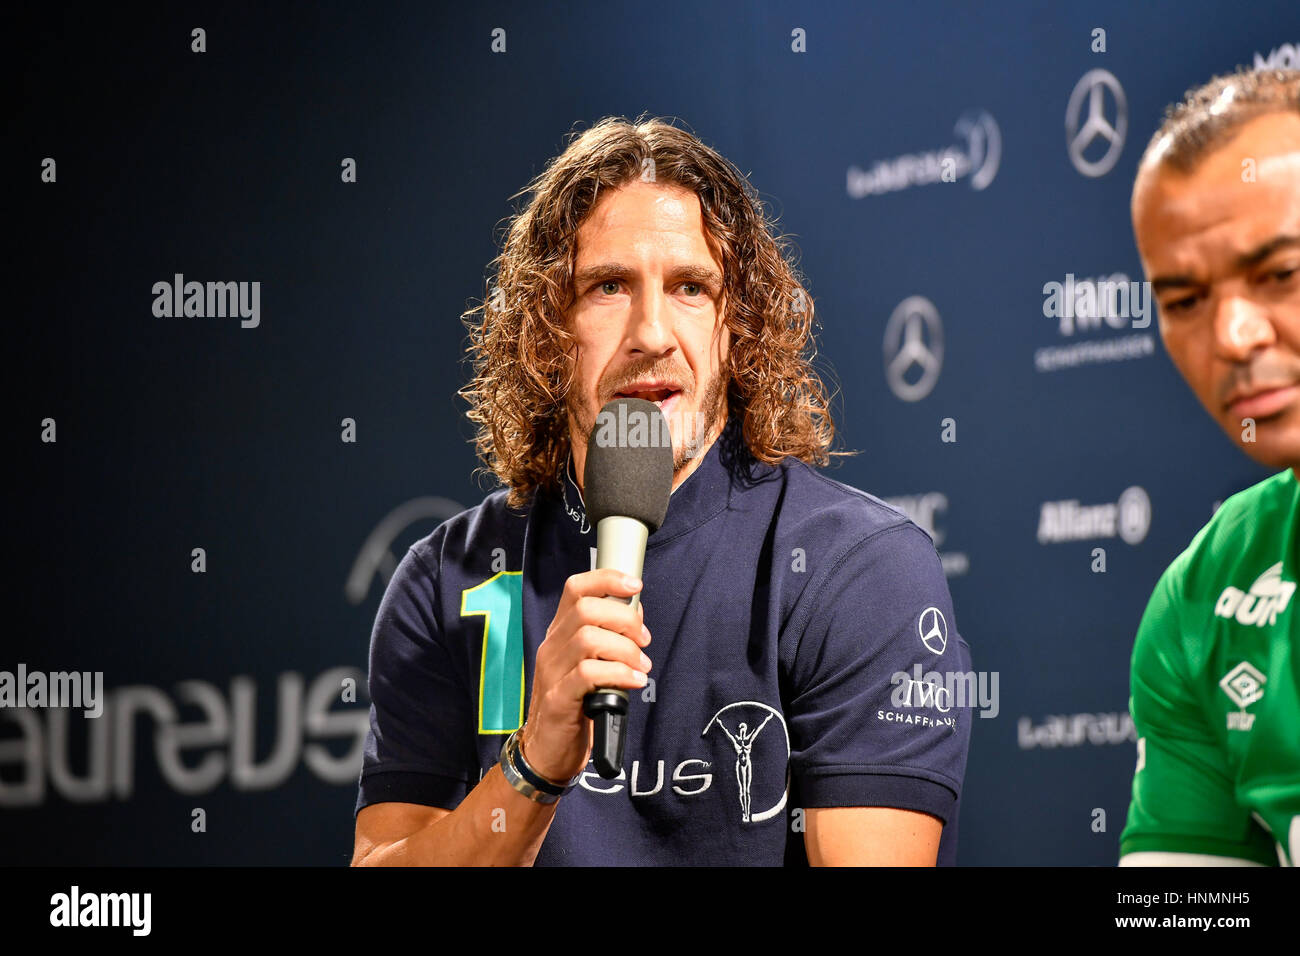 Larvotto. 14th Feb, 2017. Former football player Carles Puyol attends a press conference during the Laureus World Sports Awards 2017 in Larvotto, Monaco on Feb. 14, 2017. Credit: Chen Yichen/Xinhua/Alamy Live News Stock Photo